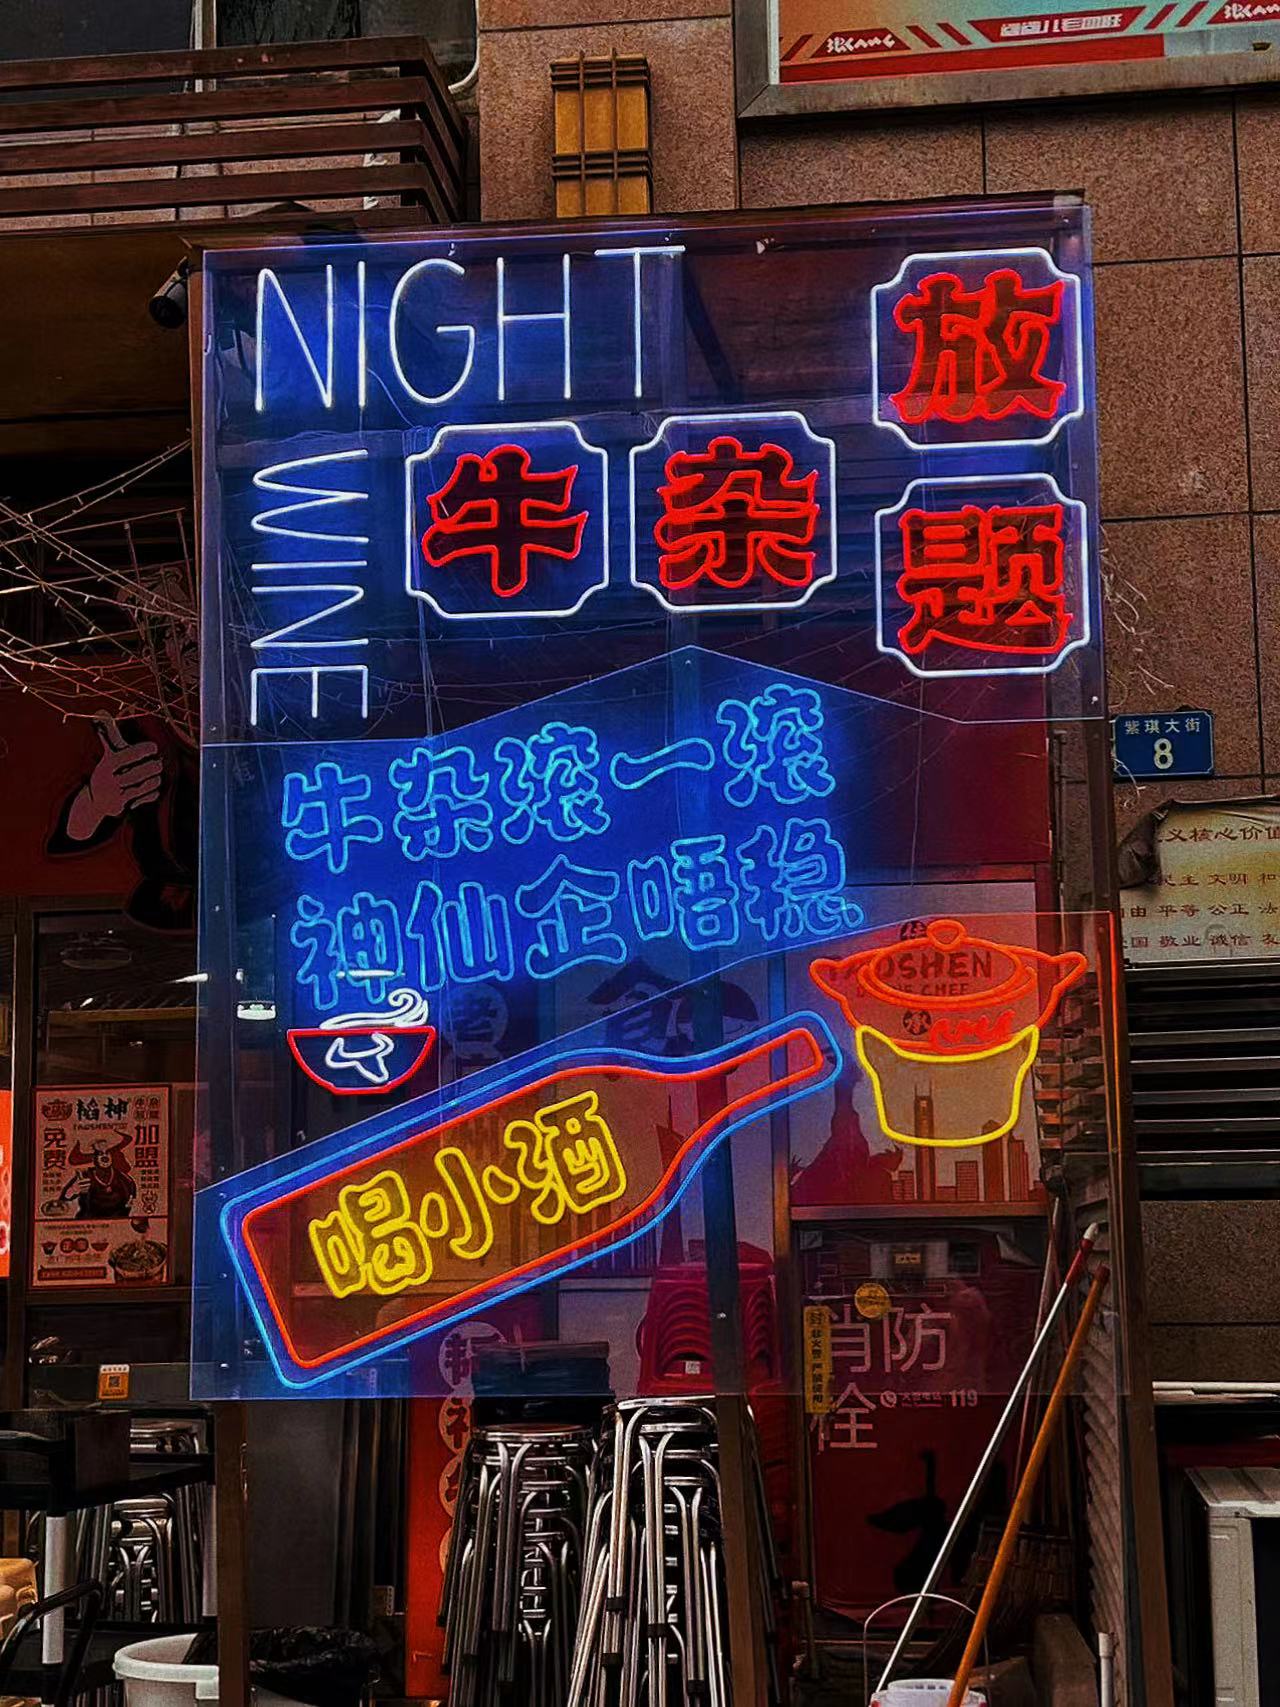 LED Neon Signs Enliven TAOSHEN OIVINE CHEF's Hong Kong Delicacies